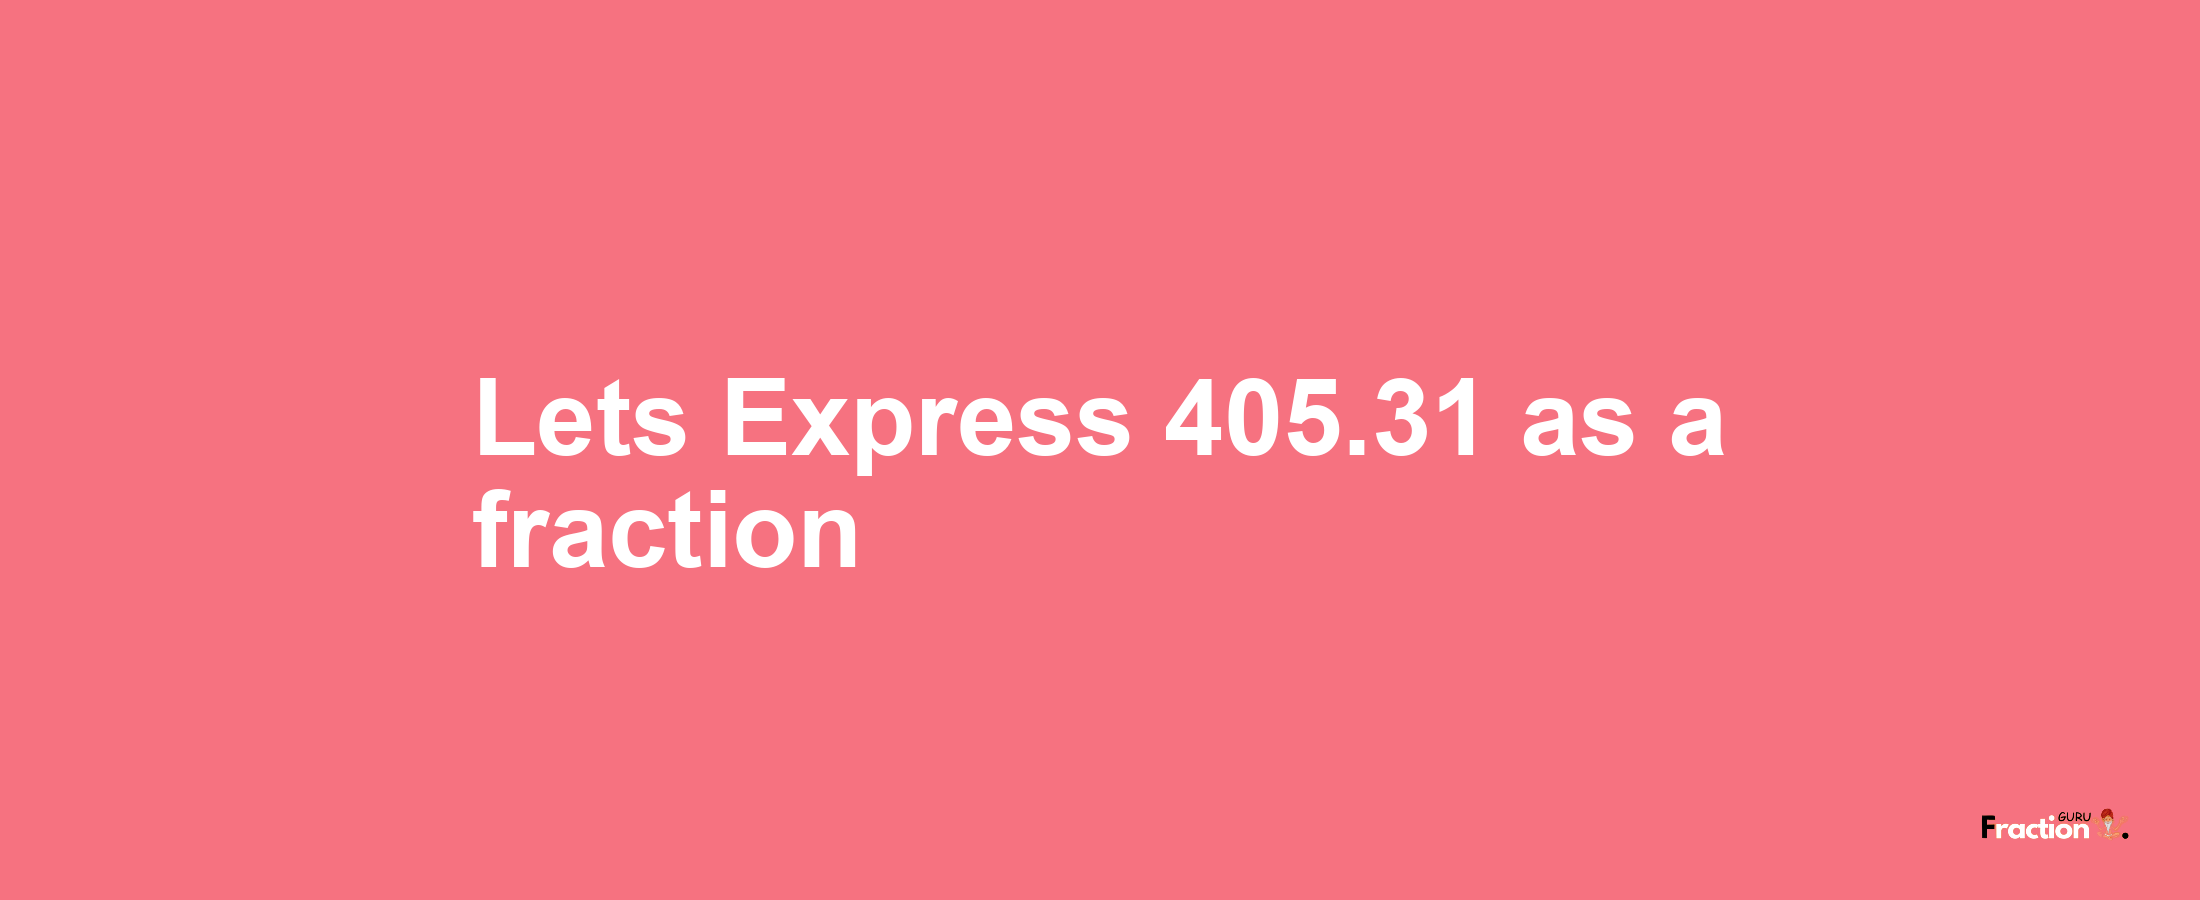 Lets Express 405.31 as afraction